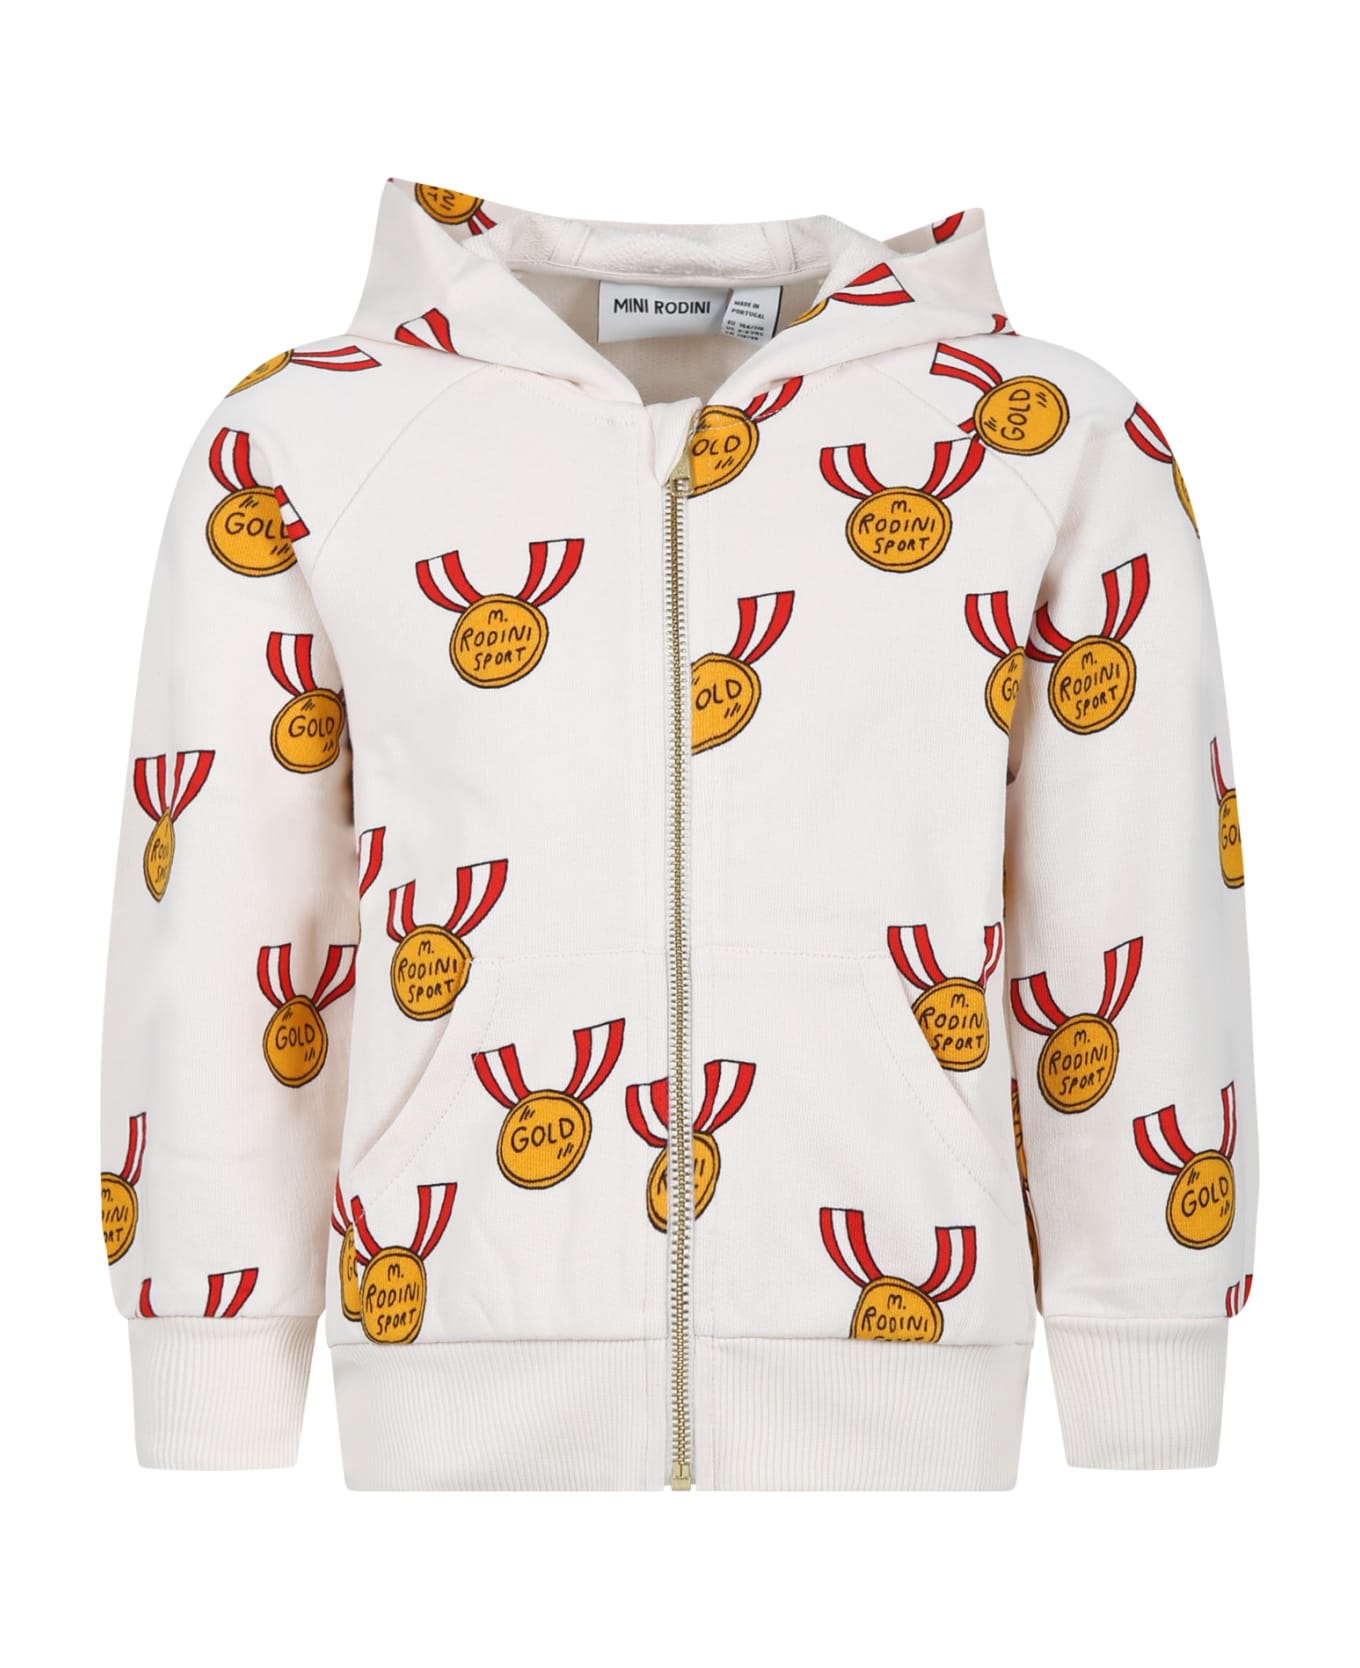 Mini Rodini Ivory Sweatshirt For Kids With Medals - Ivory